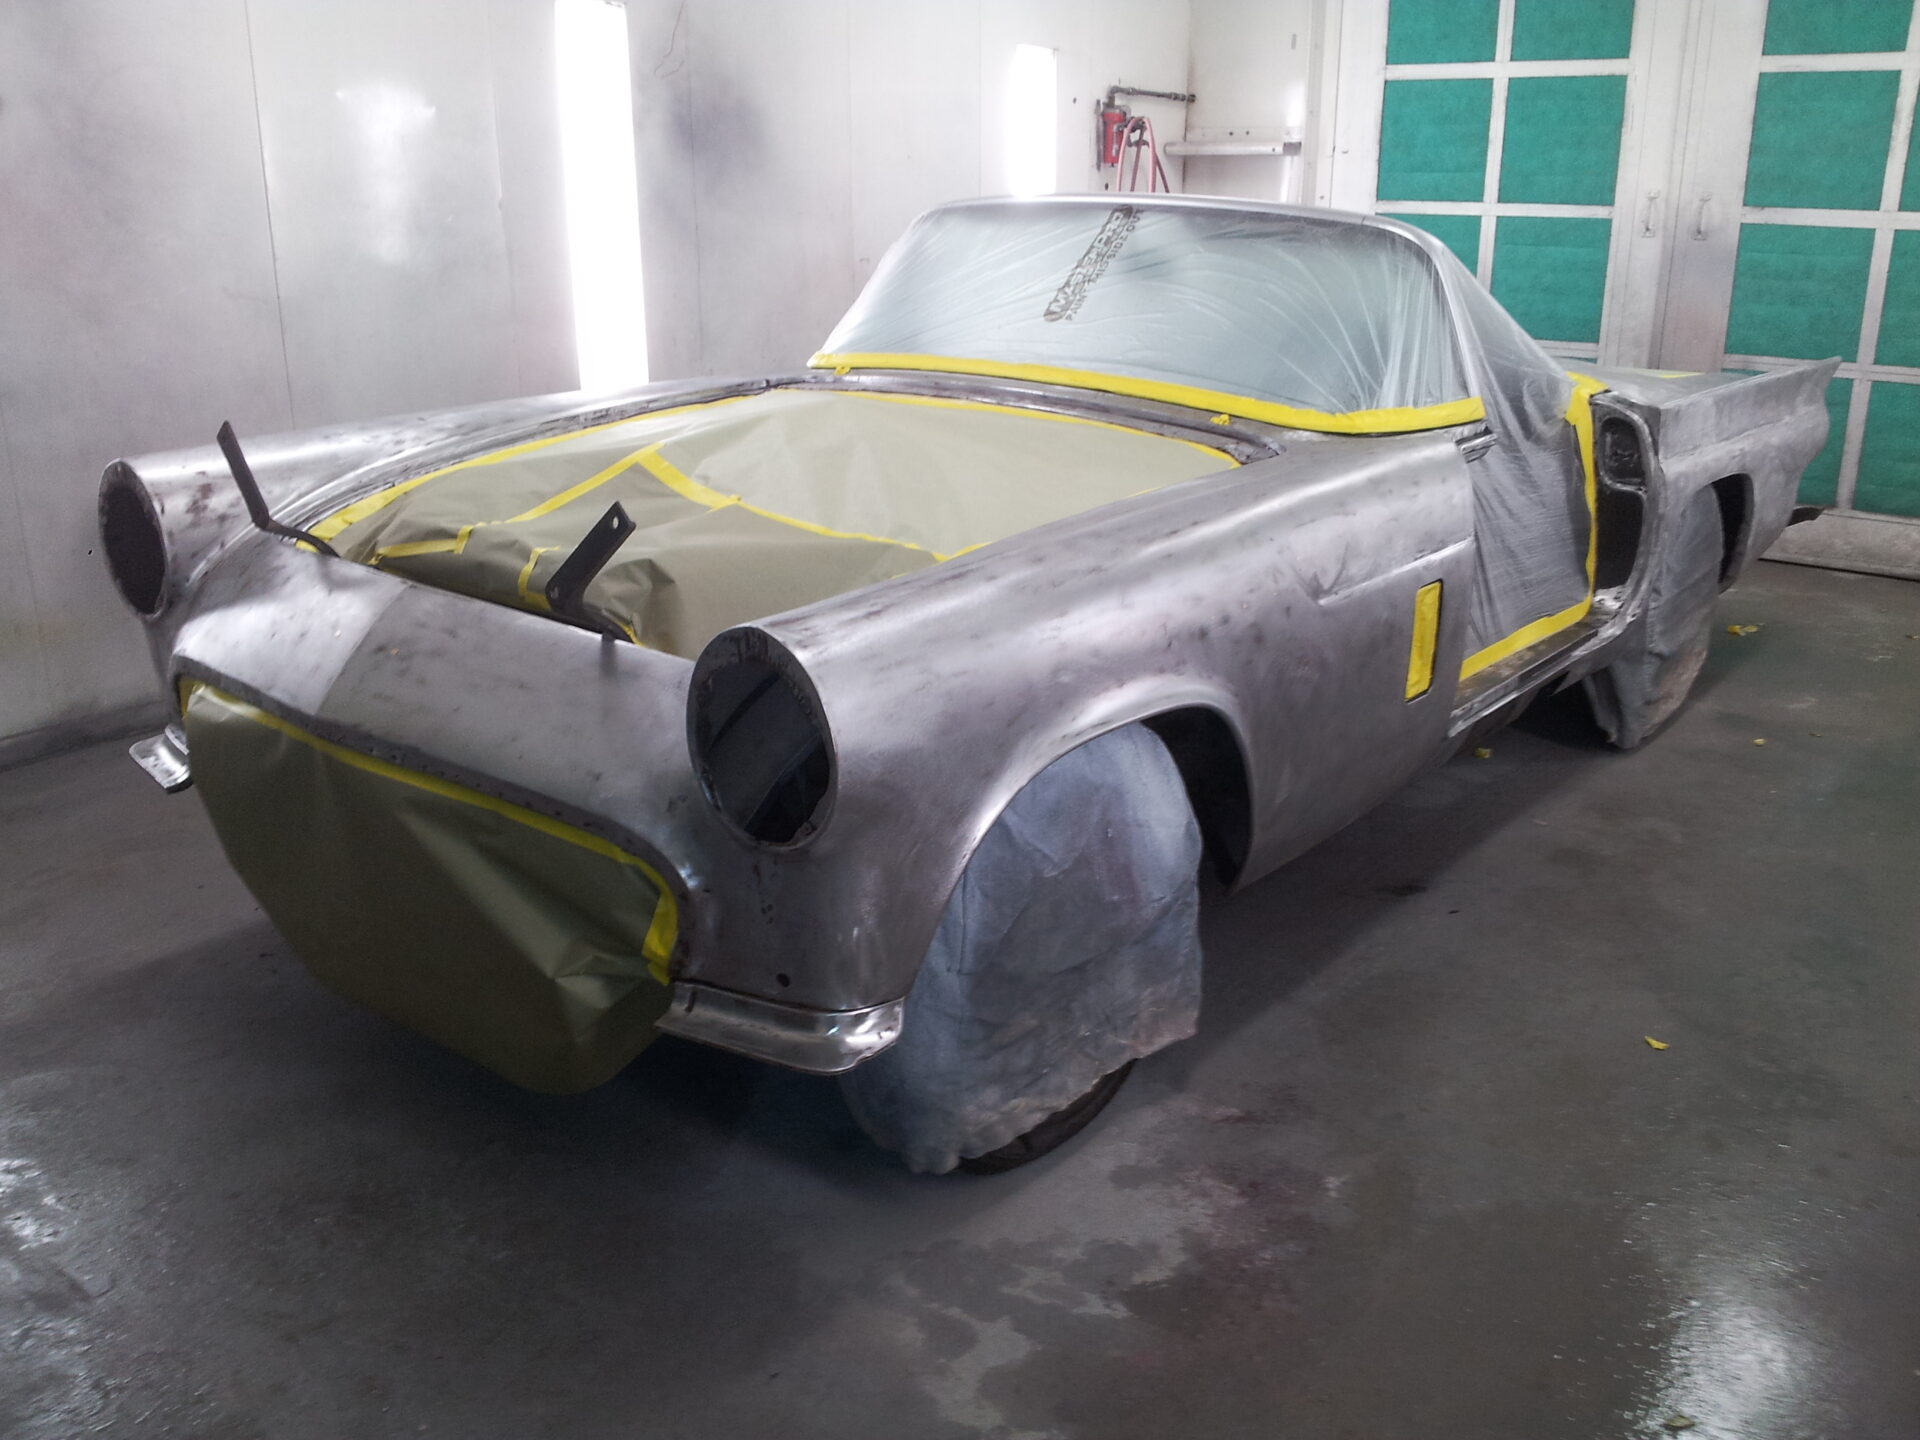 A 1957 Ford Thunderbird going for a paint job